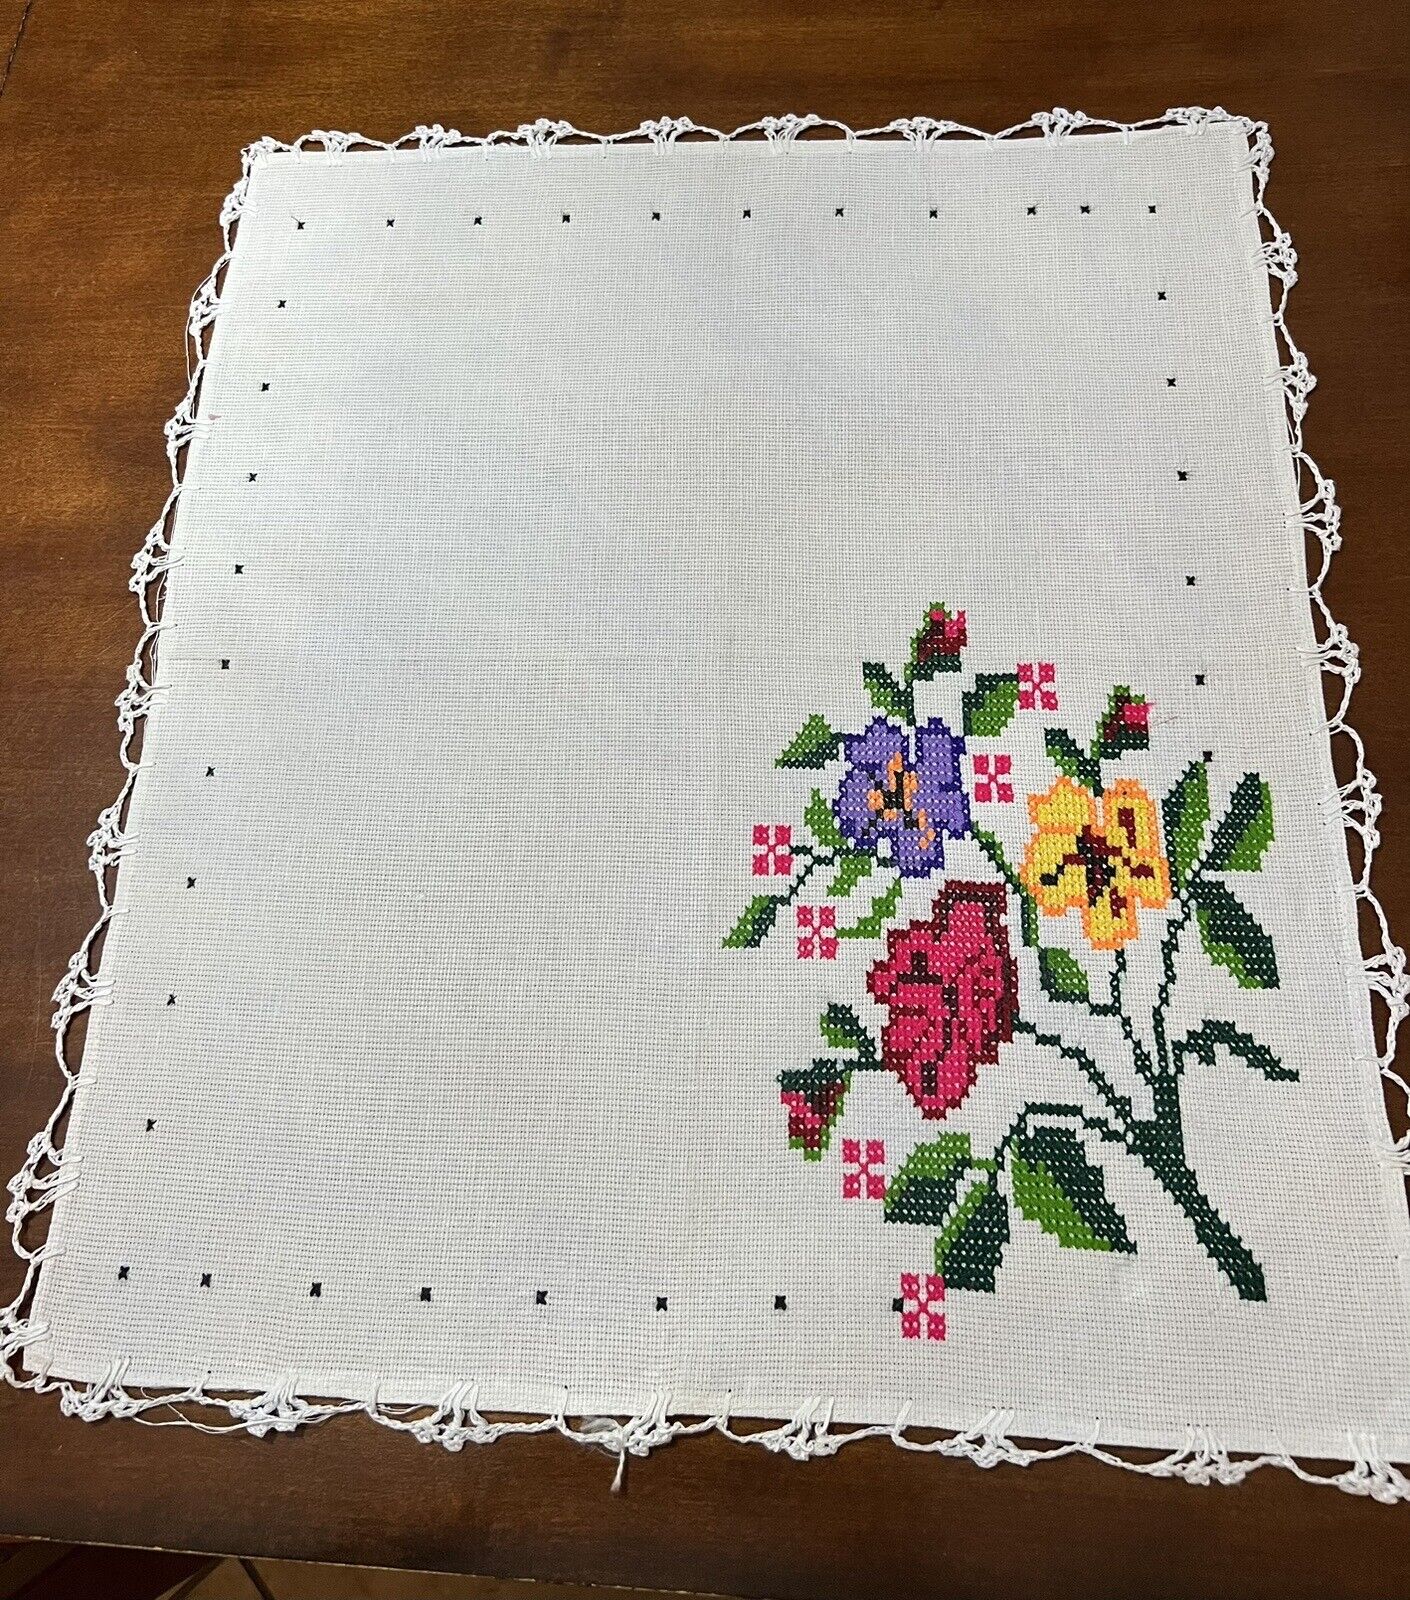 Embroidered small table topper gorgeous flowers, crocheted edge